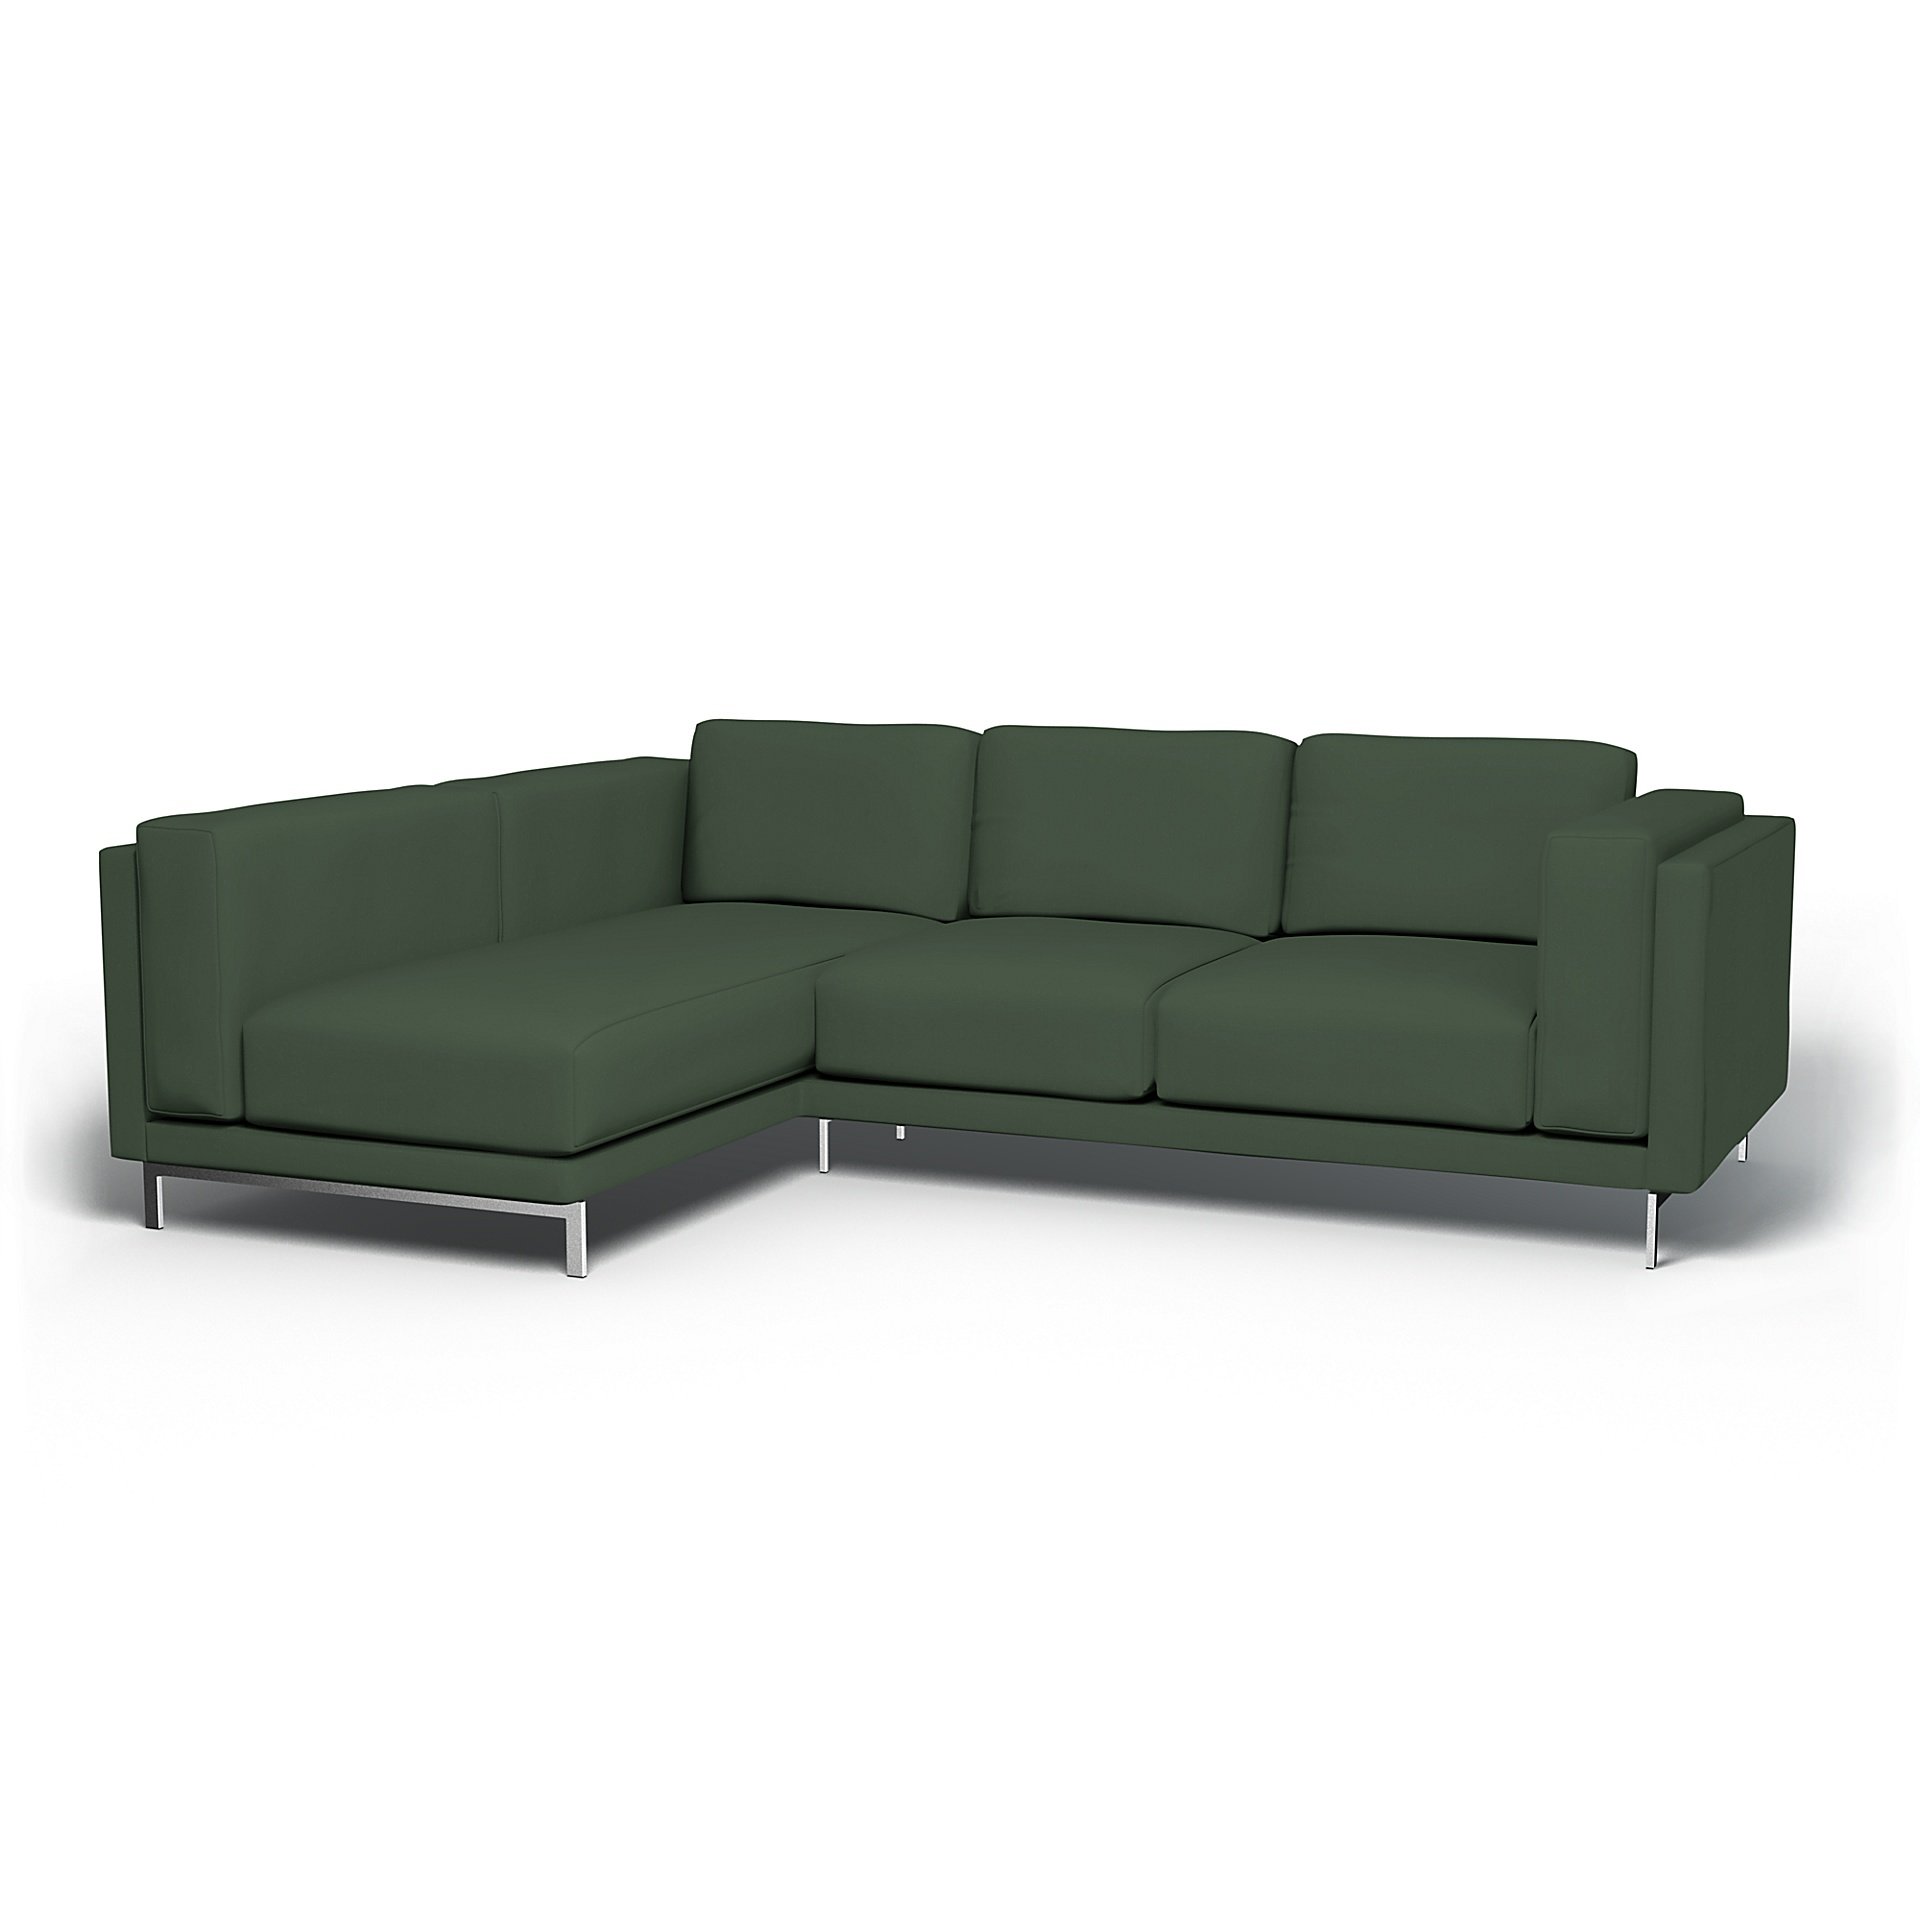 IKEA - Nockeby 3 Seater Sofa with Left Chaise Cover, Thyme, Cotton - Bemz